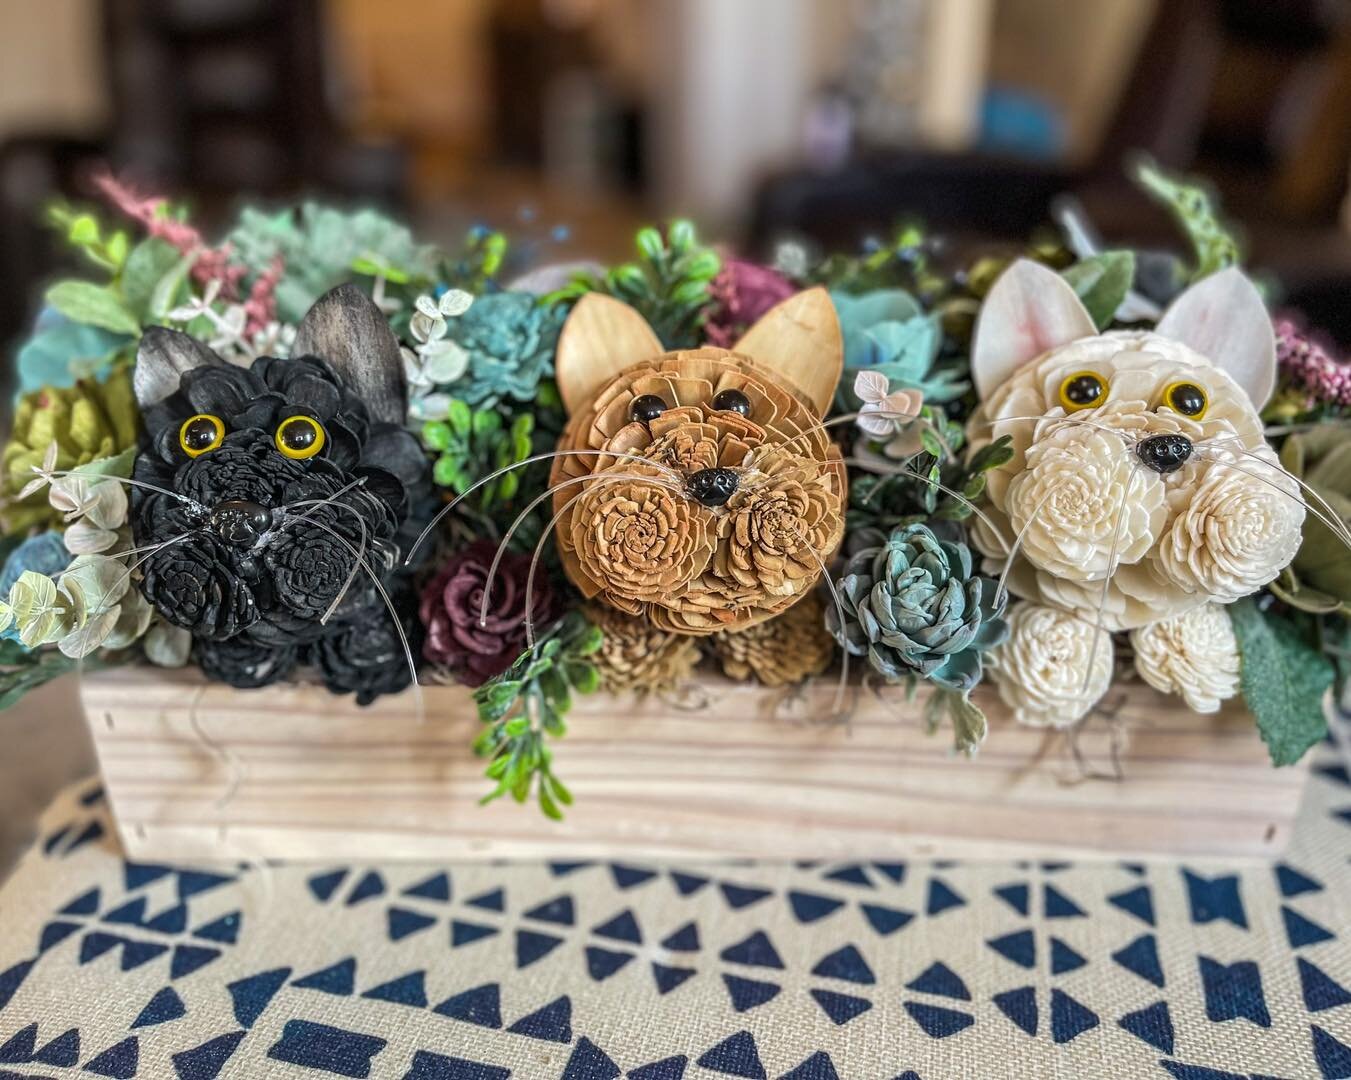 A friendly reminder that I MAKE CATS TOOOOOO! 🐱 

$35/each pet and I can ship these cuties anywhere in the US! These make incredibly thoughtful and UNIQUE gifts for the loved ones in your life, plus since they are made with wood flowers, they last f